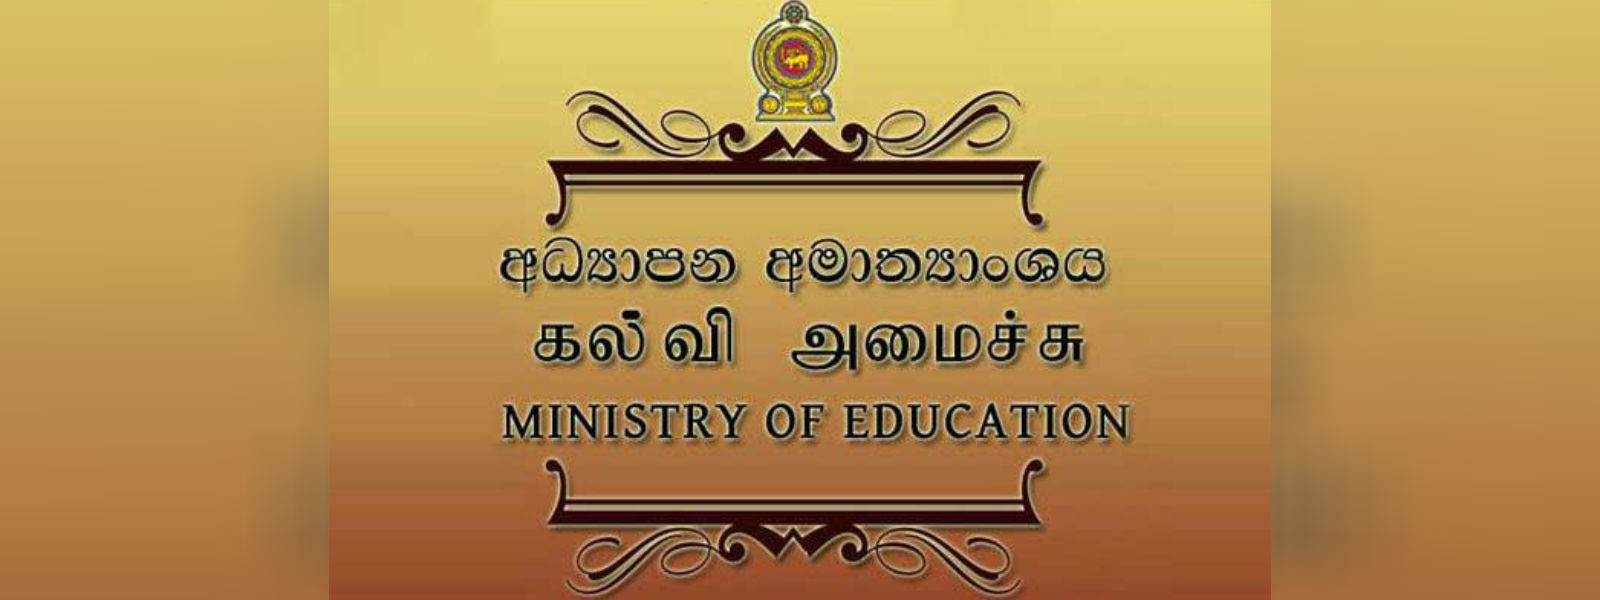 Discussion to be held on reopening schools 